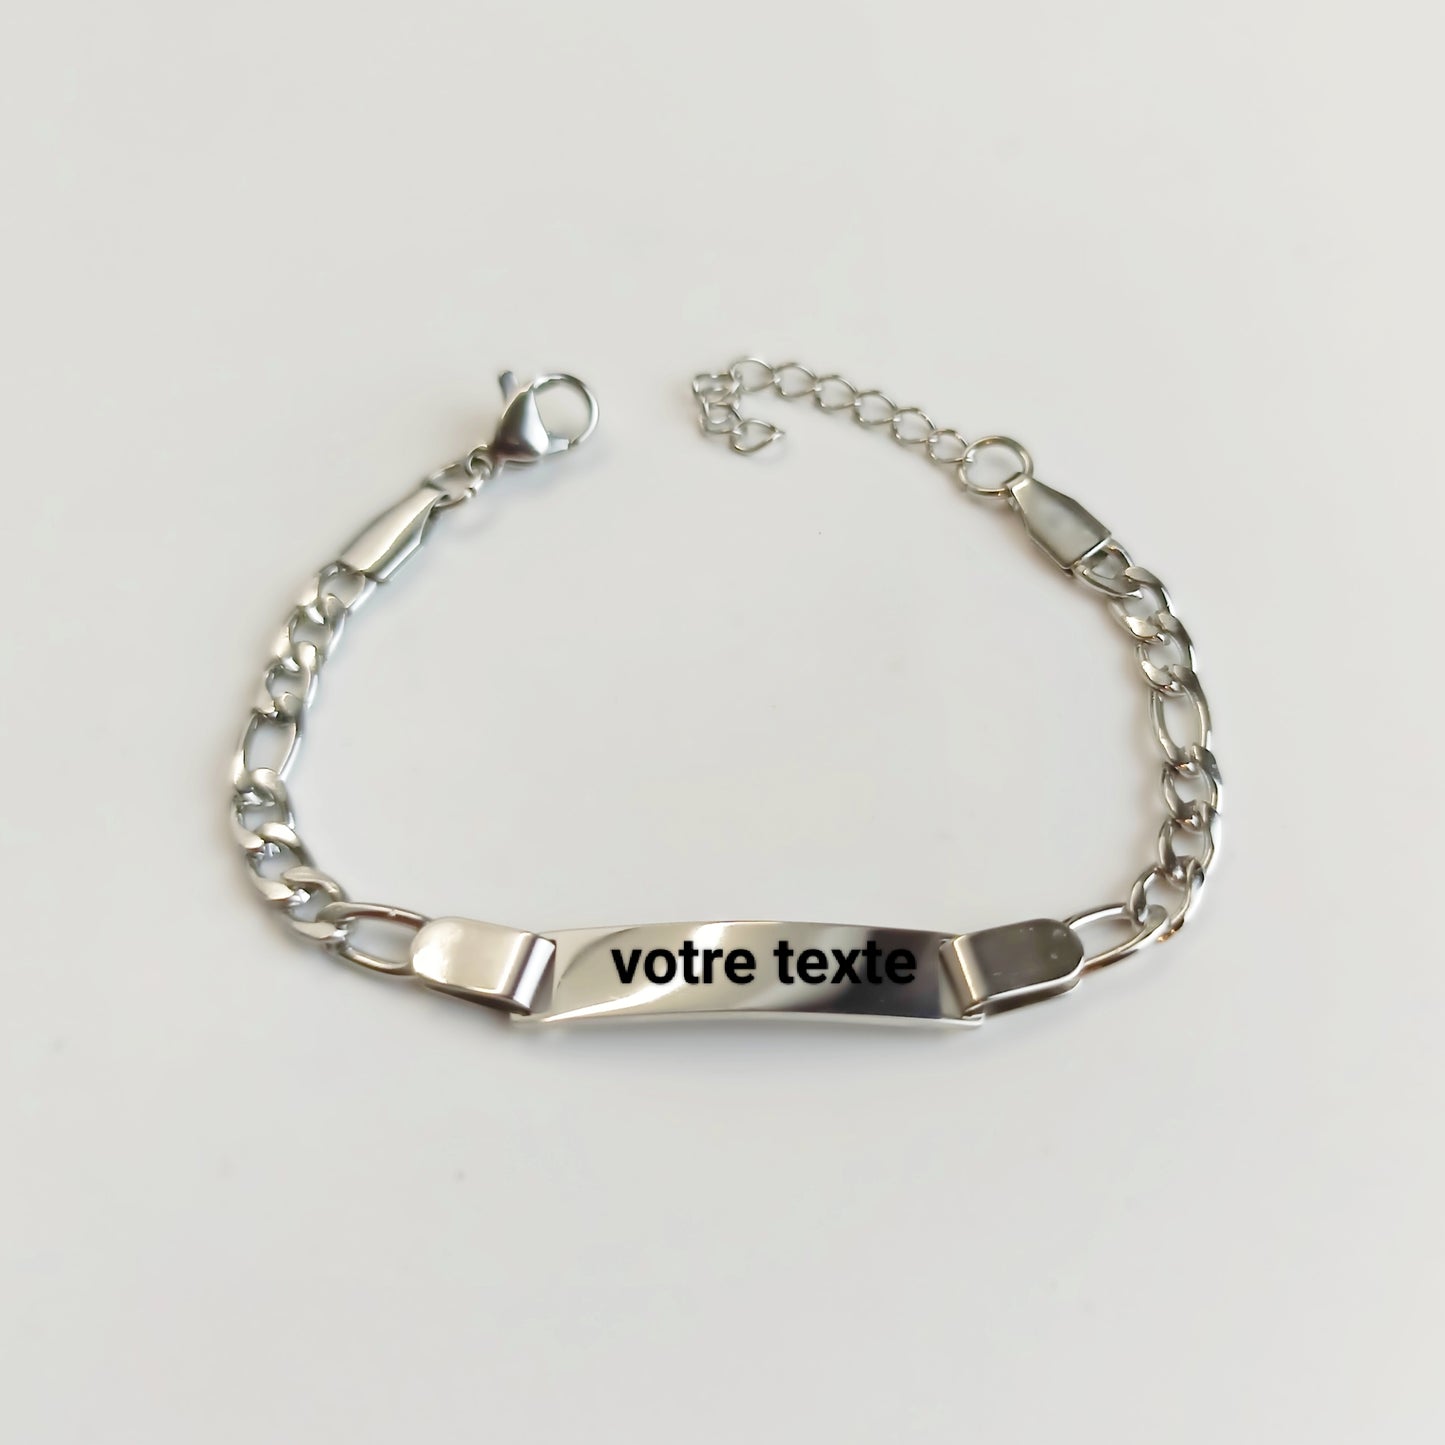 Load image into Gallery viewer, Stainless steel bracelet
